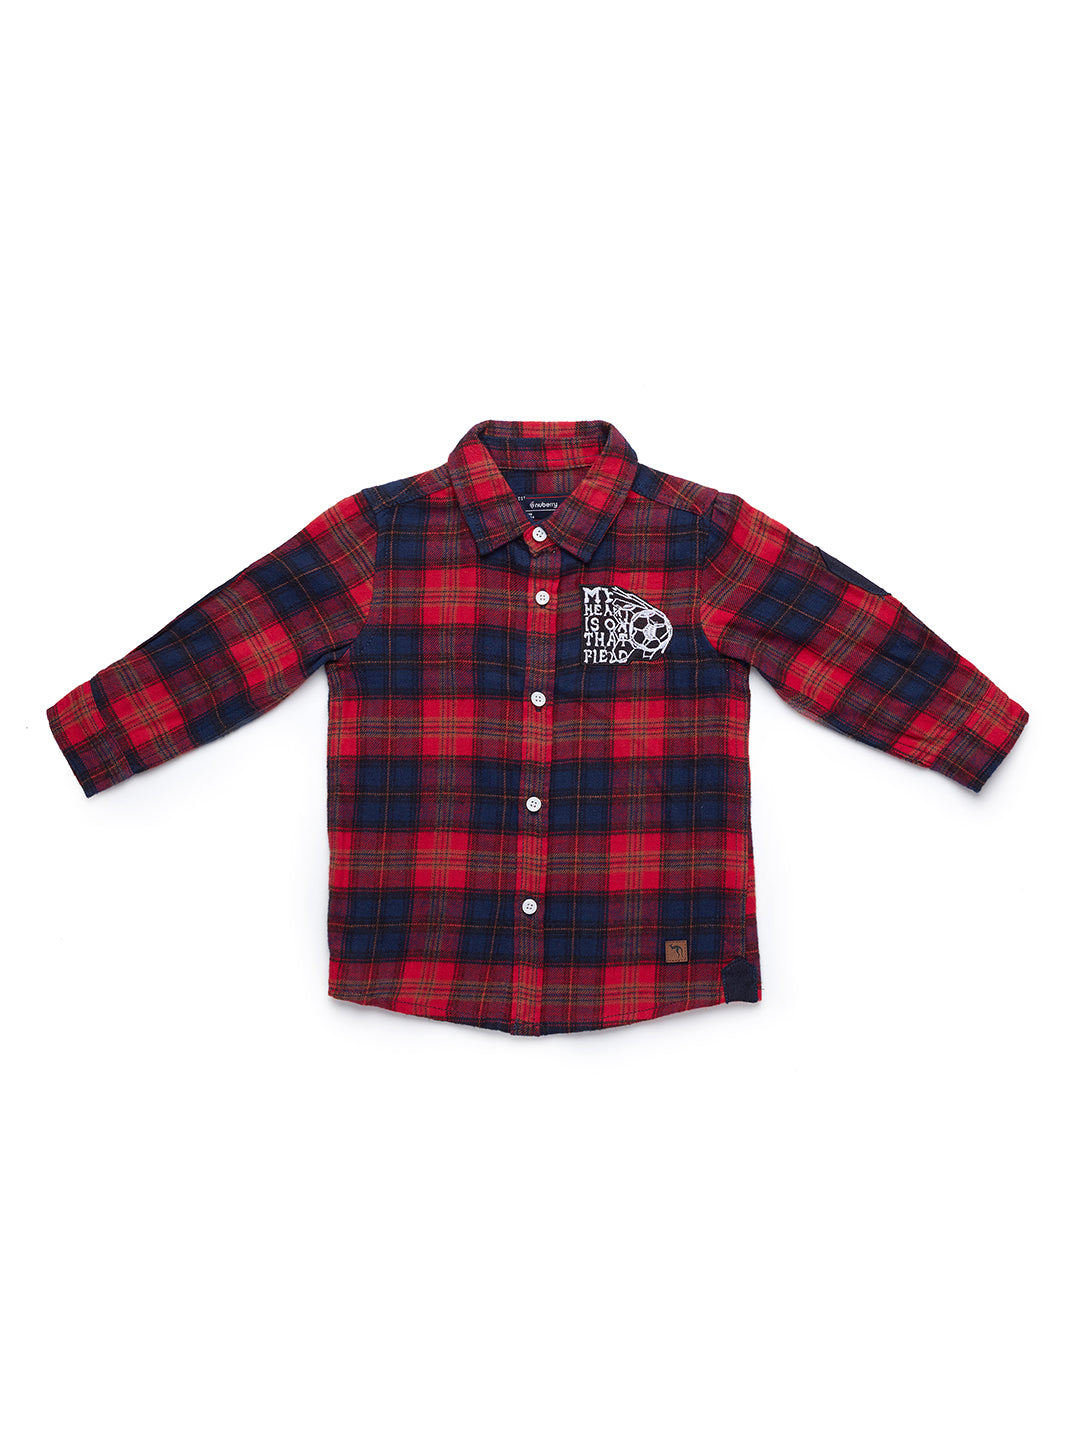 Nuberry Boys Full Sleeve Red and Navy Checked Shirt